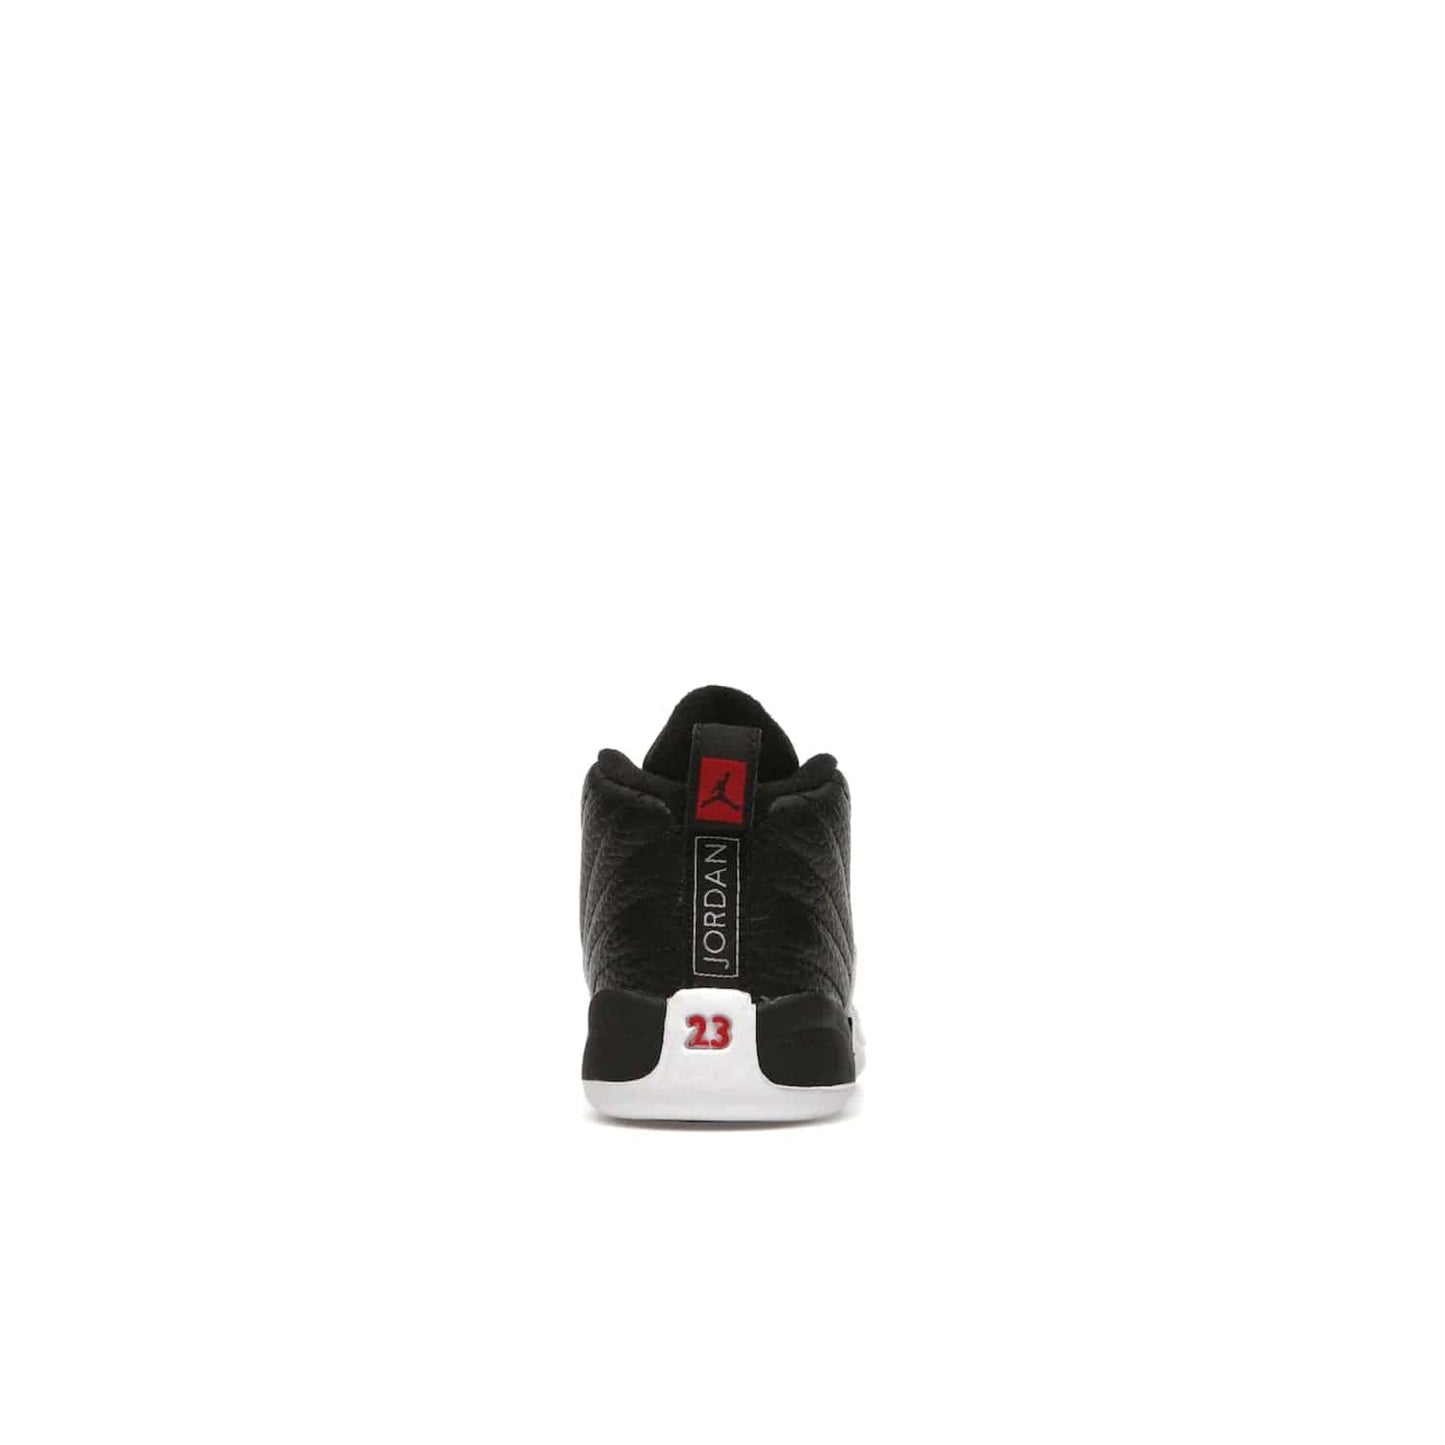 Jordan 12 Retro Playoffs (2022) (TD) - Image 28 - Only at www.BallersClubKickz.com - Stay stylish with the Air Jordan 12 Retro Playoffs 2022 (TD) toddler shoe. All-black upper with red and white accents plus subtle gold details. Bright white midsole and sole. Perfect for any outing or special event.